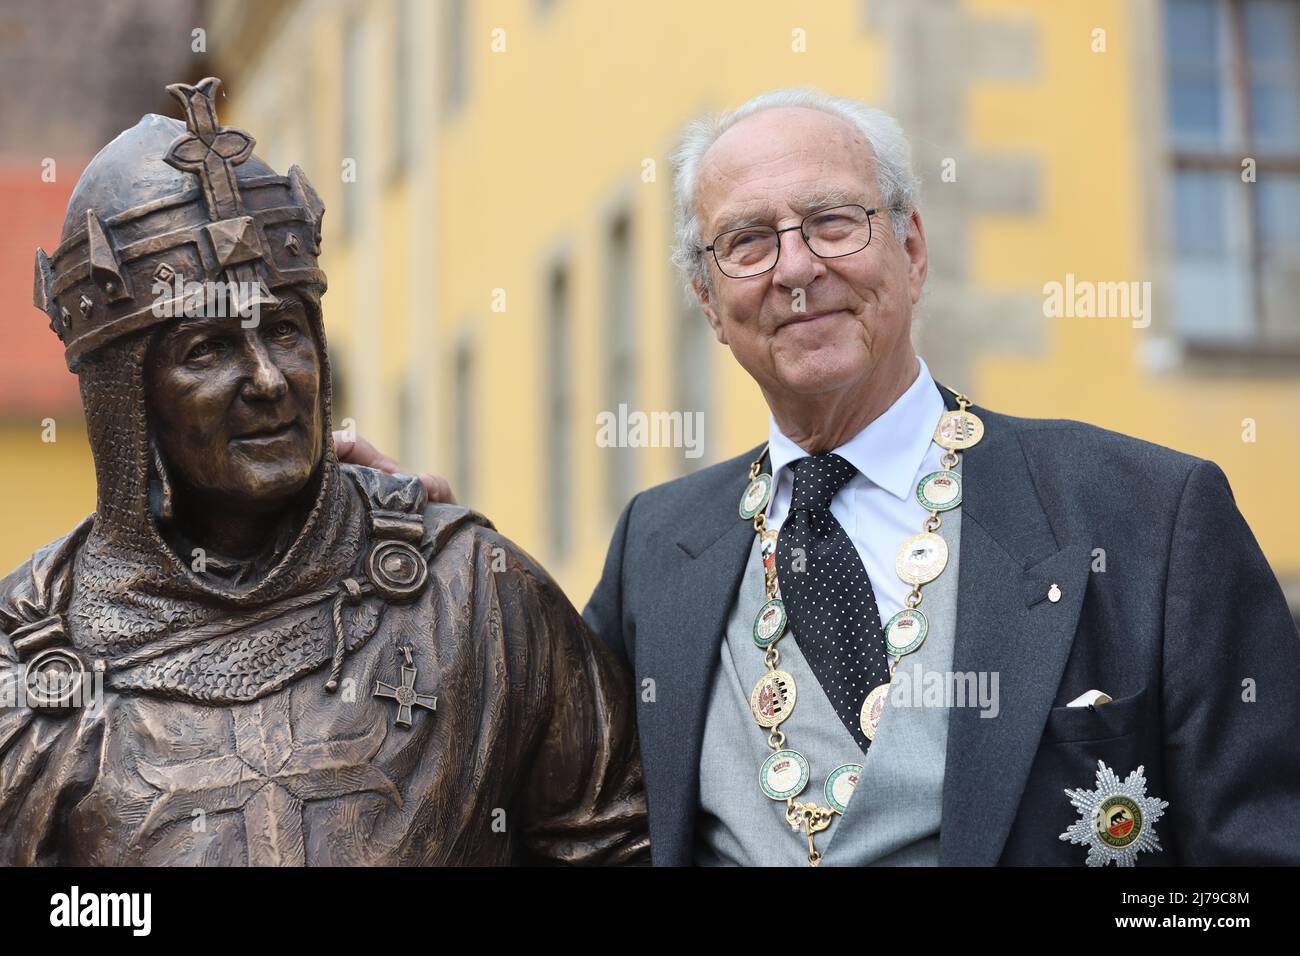 07 May 2022, Saxony-Anhalt, Ballenstedt: Eduard Prince of Anhalt stands at the newly designed monument to Albrecht the Bear. Eduard von Anhalt celebrates his 80th birthday in Ballenstedt. At the same time the investiture took place. Within the scope of the Investiture, persons are honored annually for special achievements by the Askan House Order 'Albrecht the Bear'. The investiture takes place in the presence of Eduard Prince of Anhalt. Photo: Matthias Bein/dpa/ZB Stock Photo